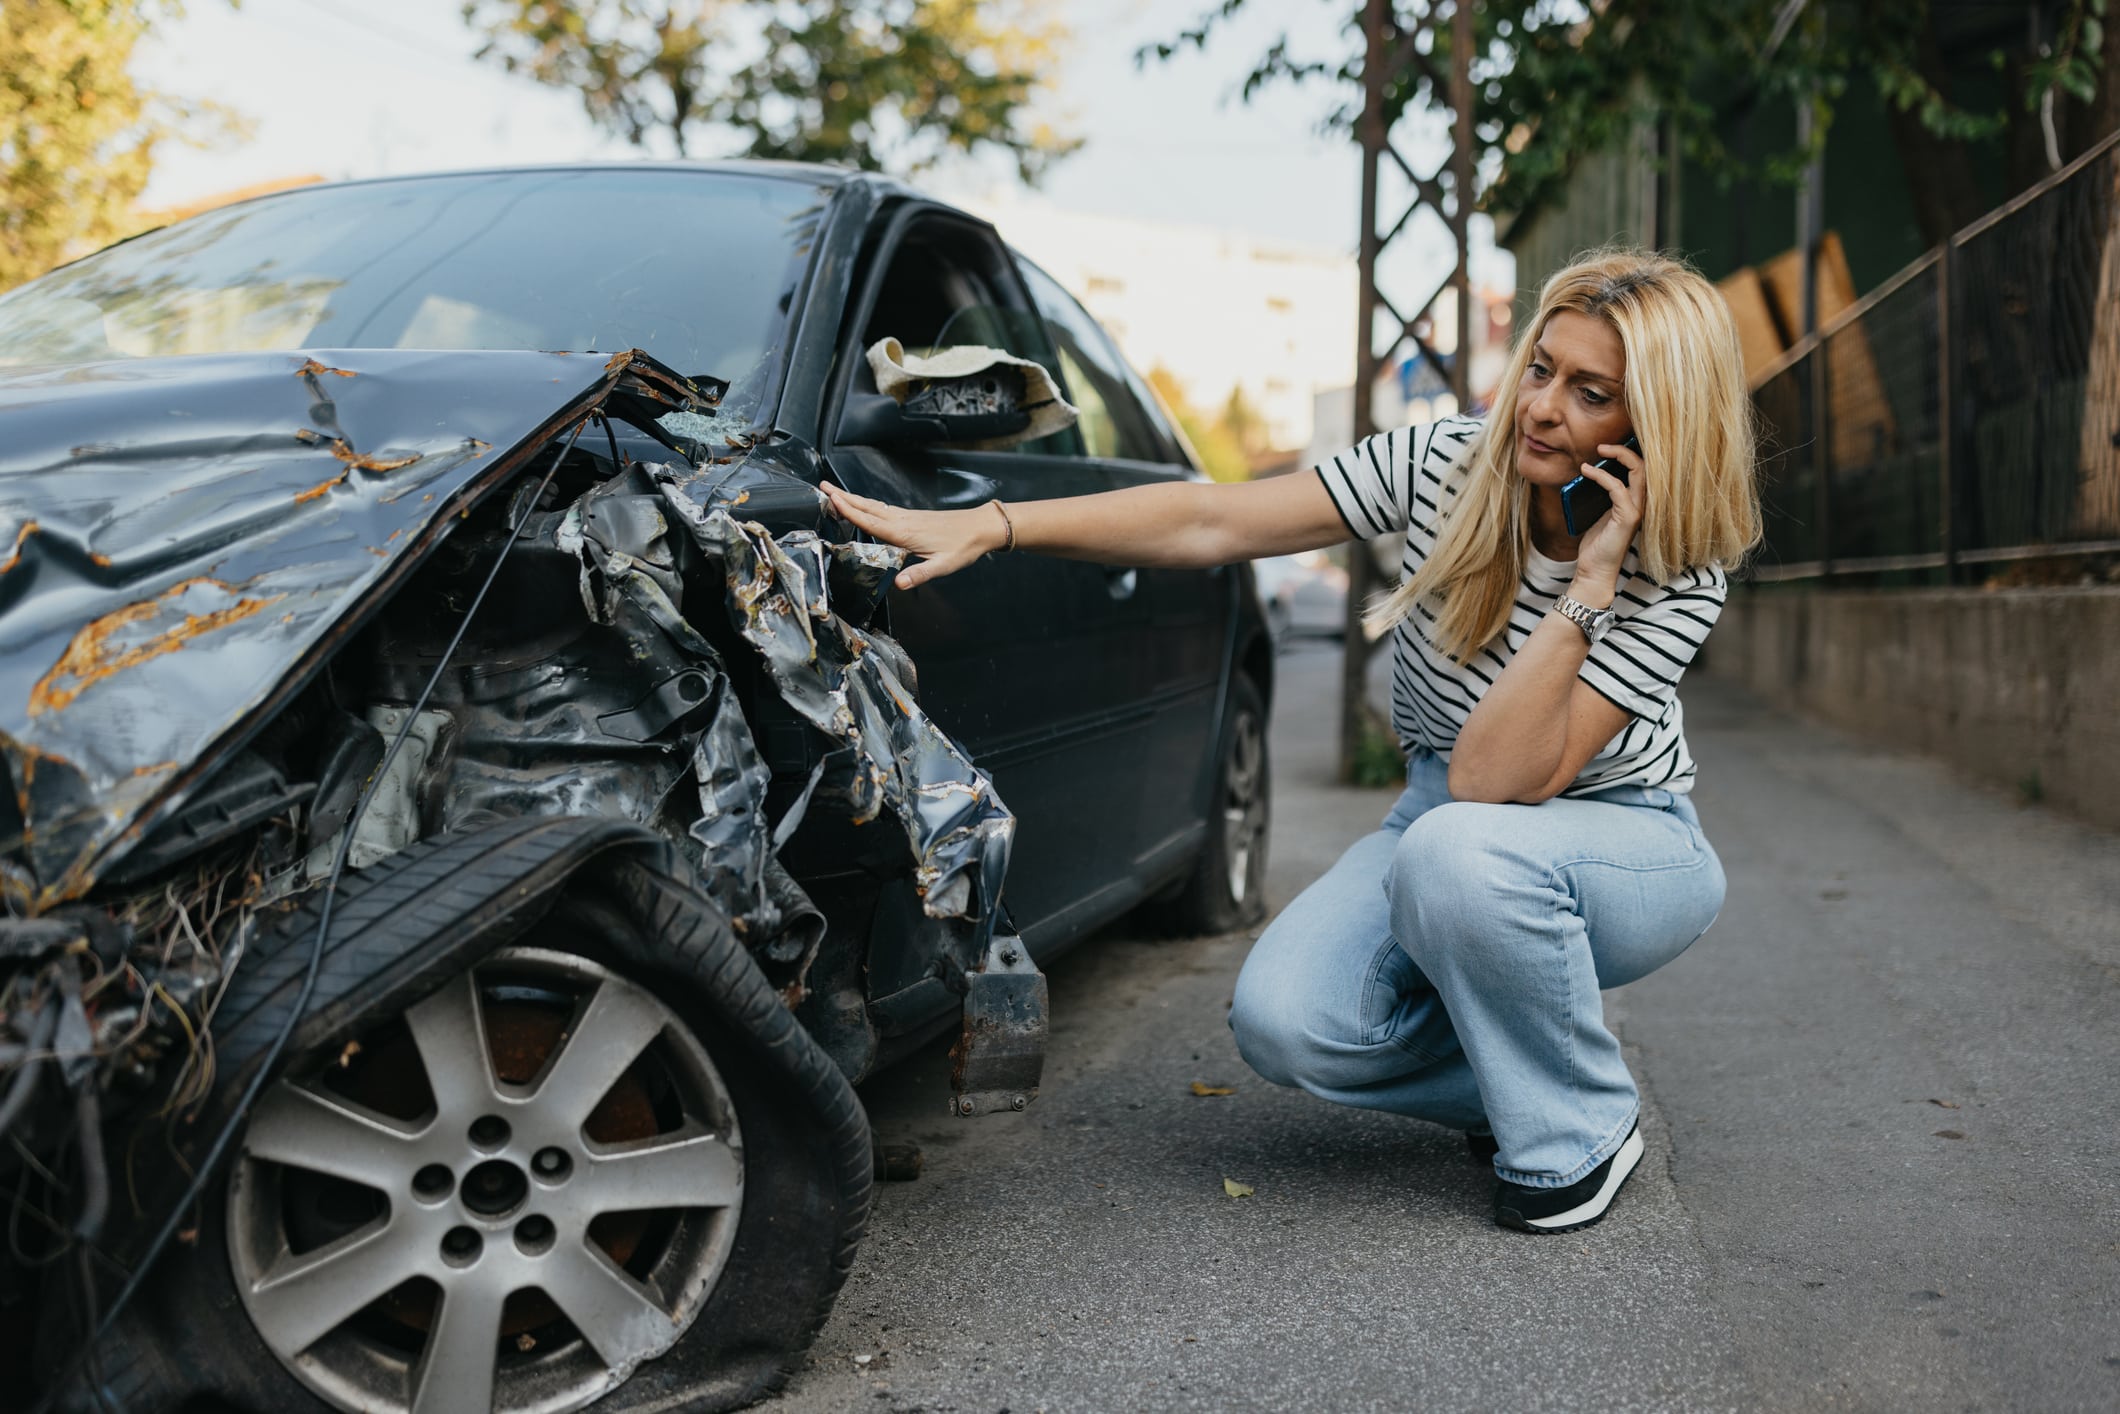 Types of vehicle accidents